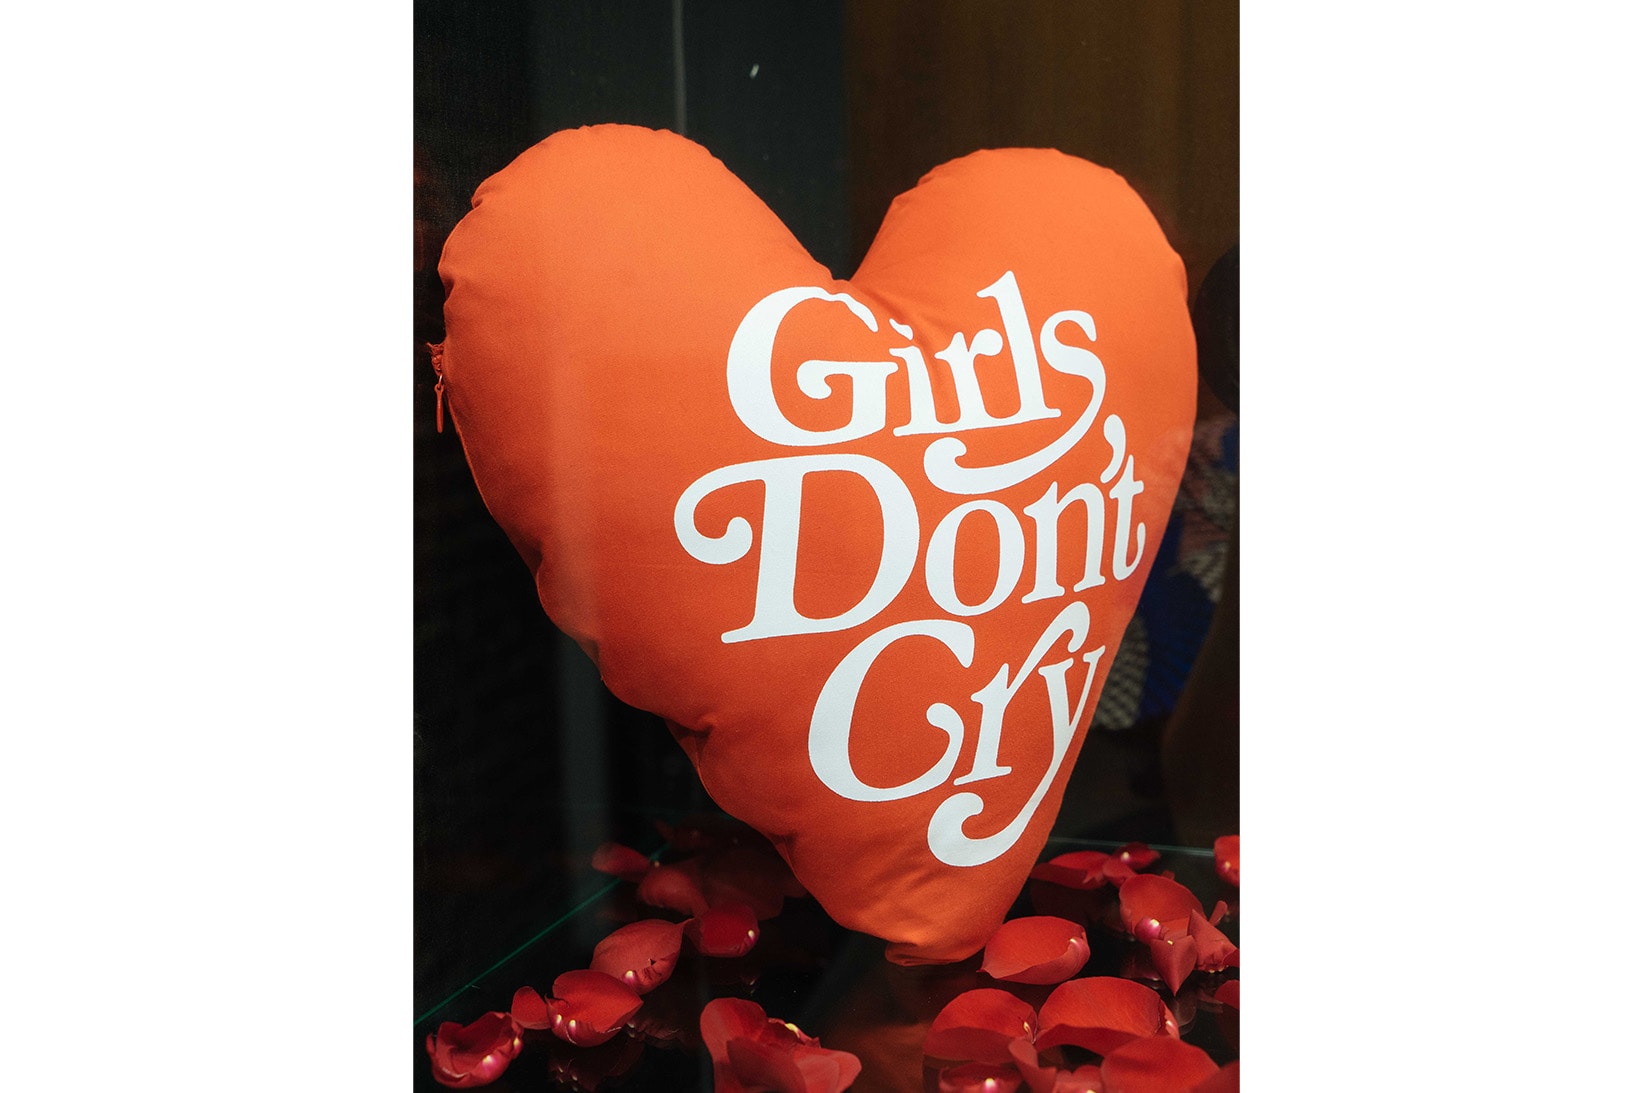 Girls Don't Cry Pop-Up Store Los Angeles Verdy Where to Buy Brand T-shirts Hoodies Pillows Japan